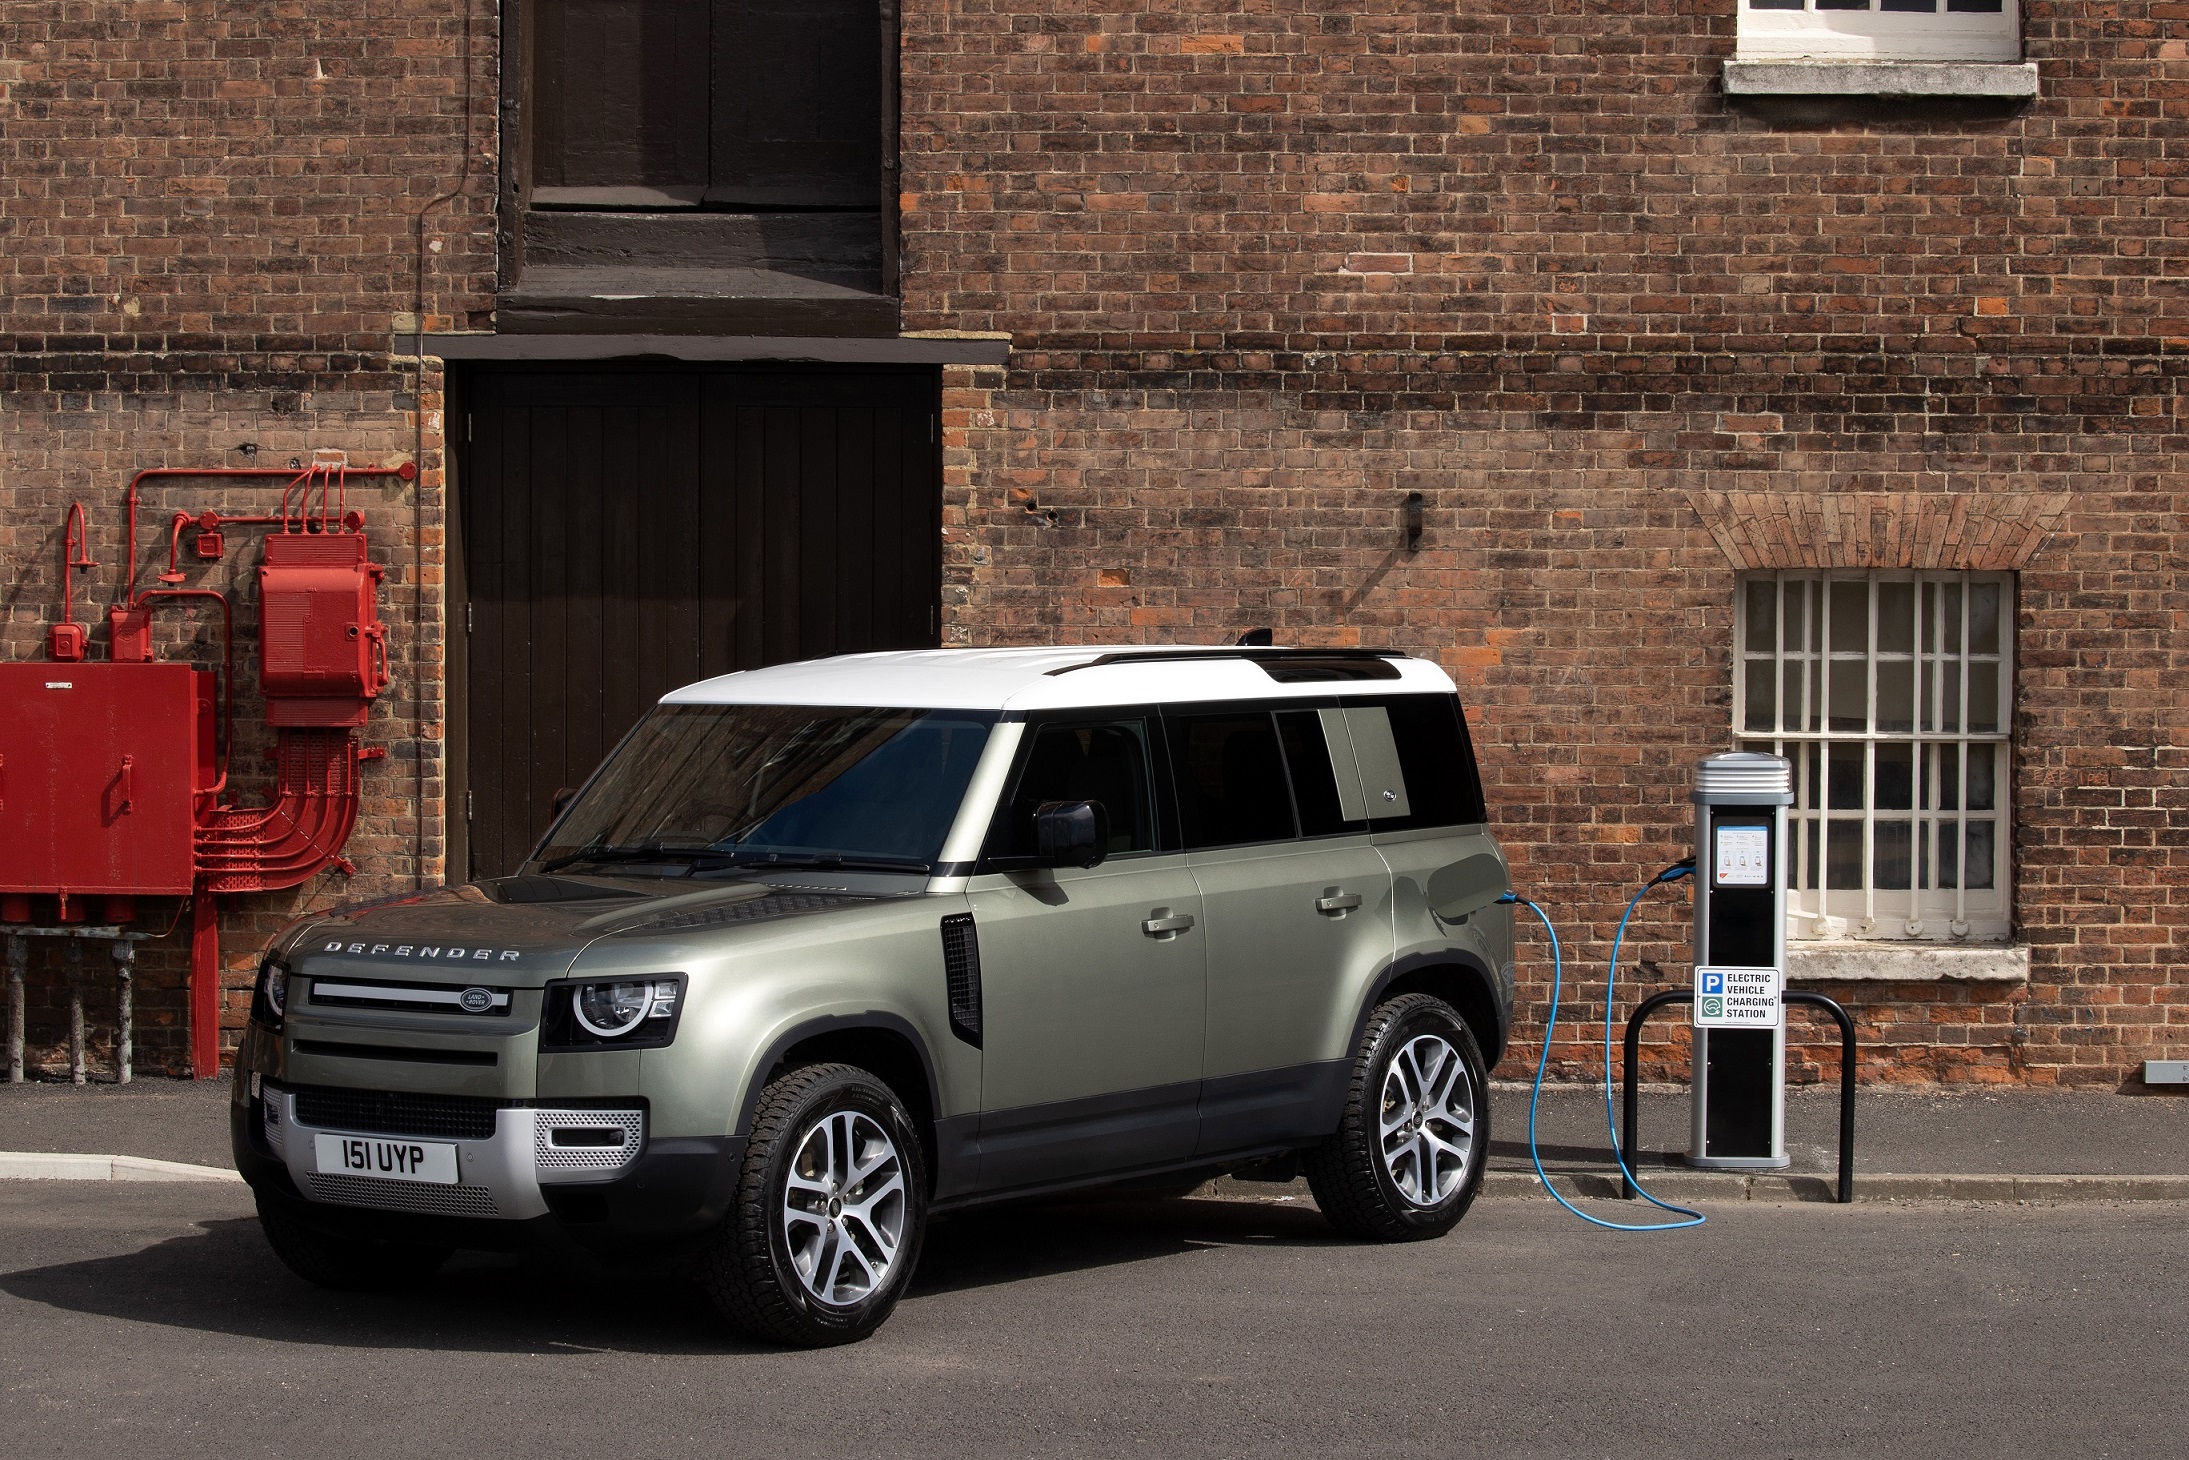 Land Rover Defender Crowned 2021 World Car Design of the Year